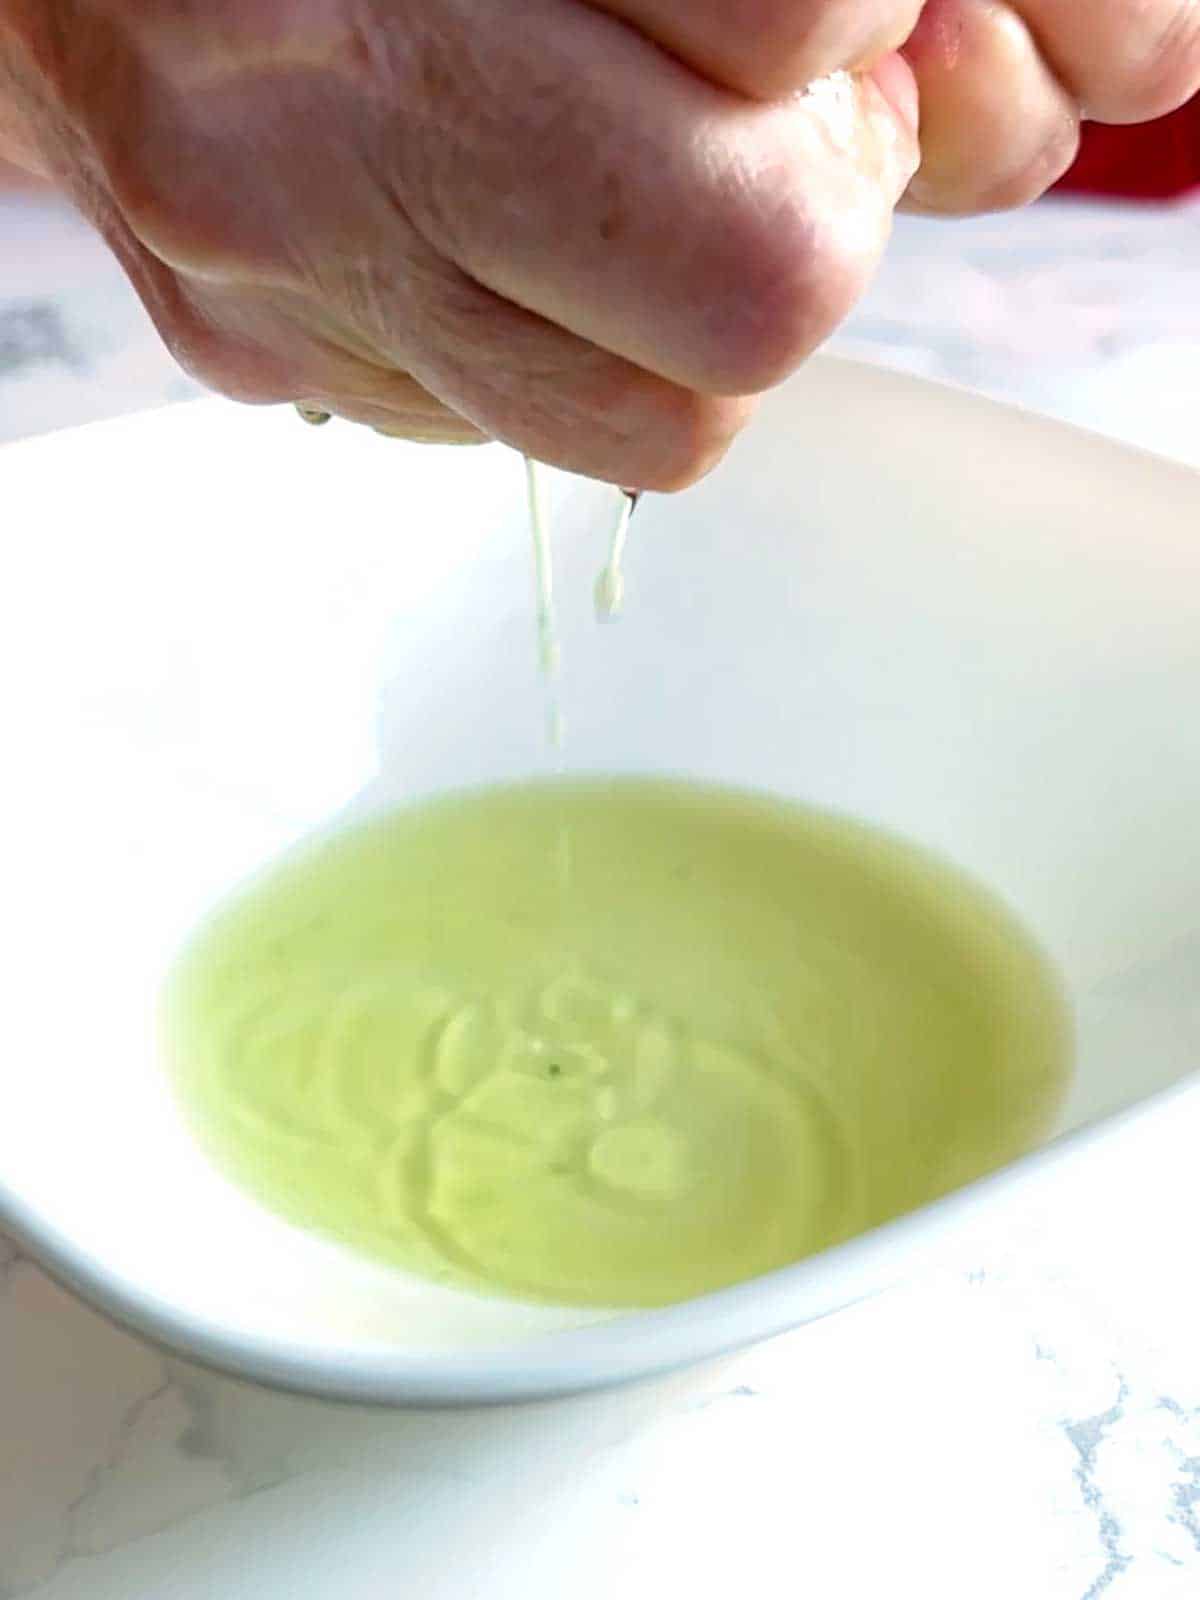 Squeezing liquid from spinach.